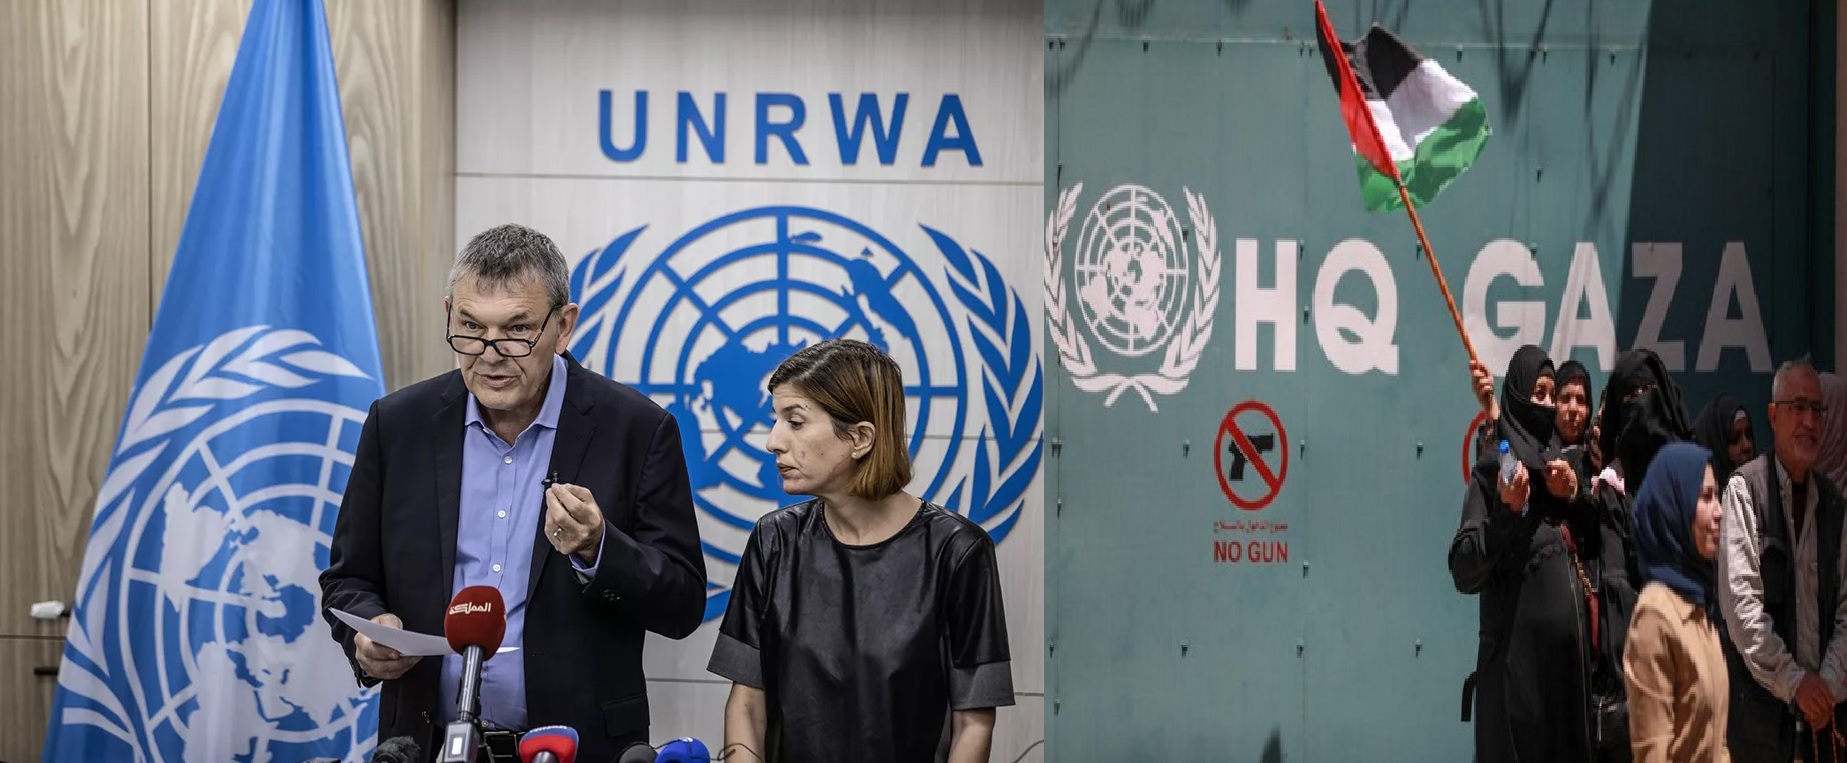 Many Countries Halt Funding to UNRWA Over Claims of 12 Staff’s Involvement in 7 Oct Massacre in Israel